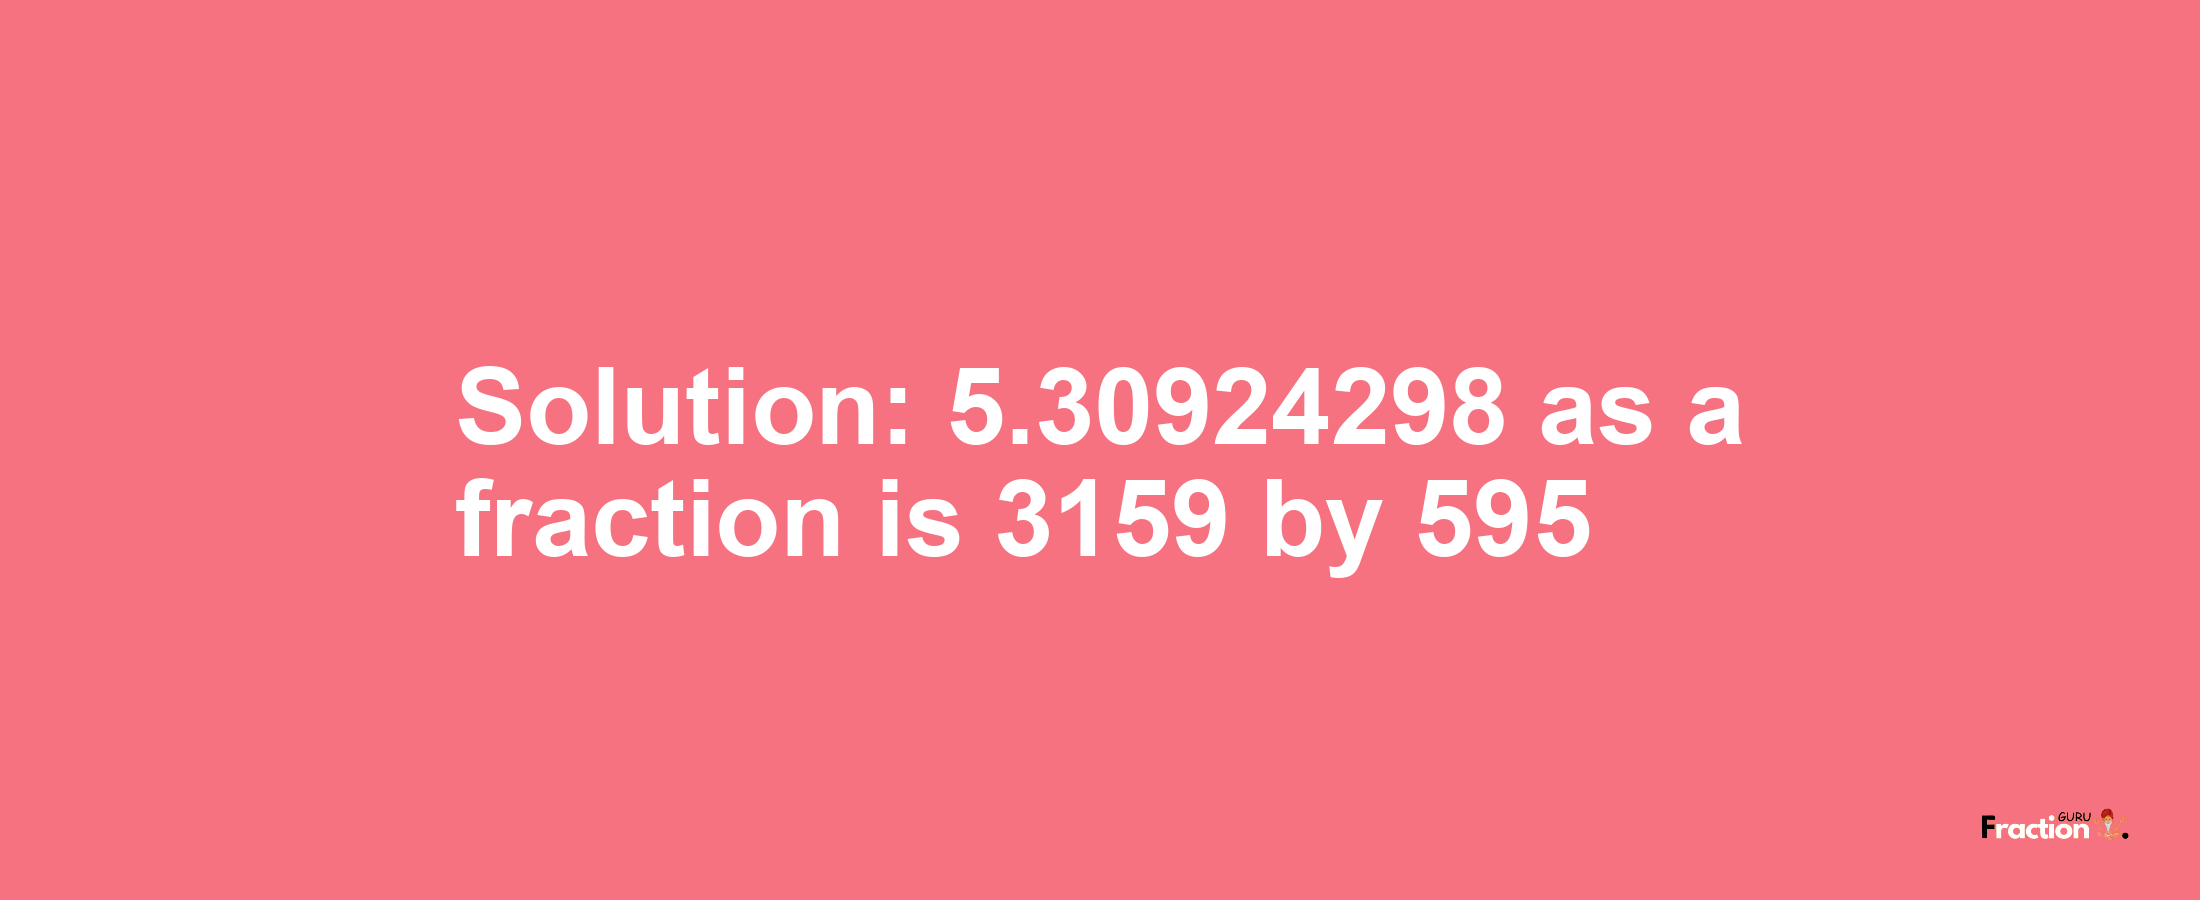 Solution:5.30924298 as a fraction is 3159/595